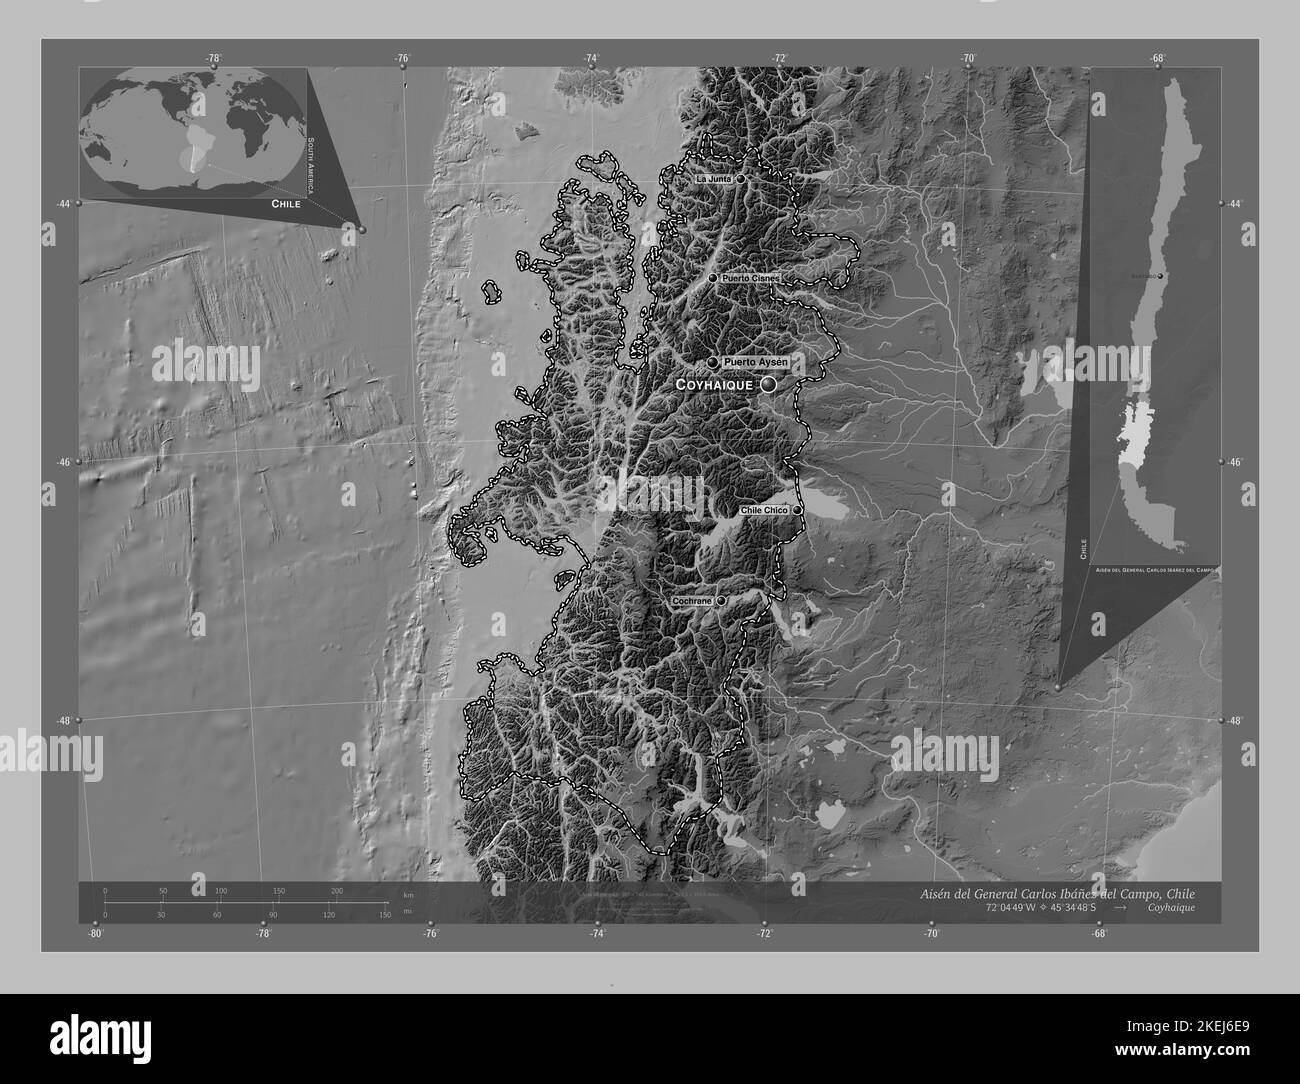 Aisen del General Carlos Ibanez del Campo, region of Chile. Grayscale elevation map with lakes and rivers. Locations and names of major cities of the Stock Photo